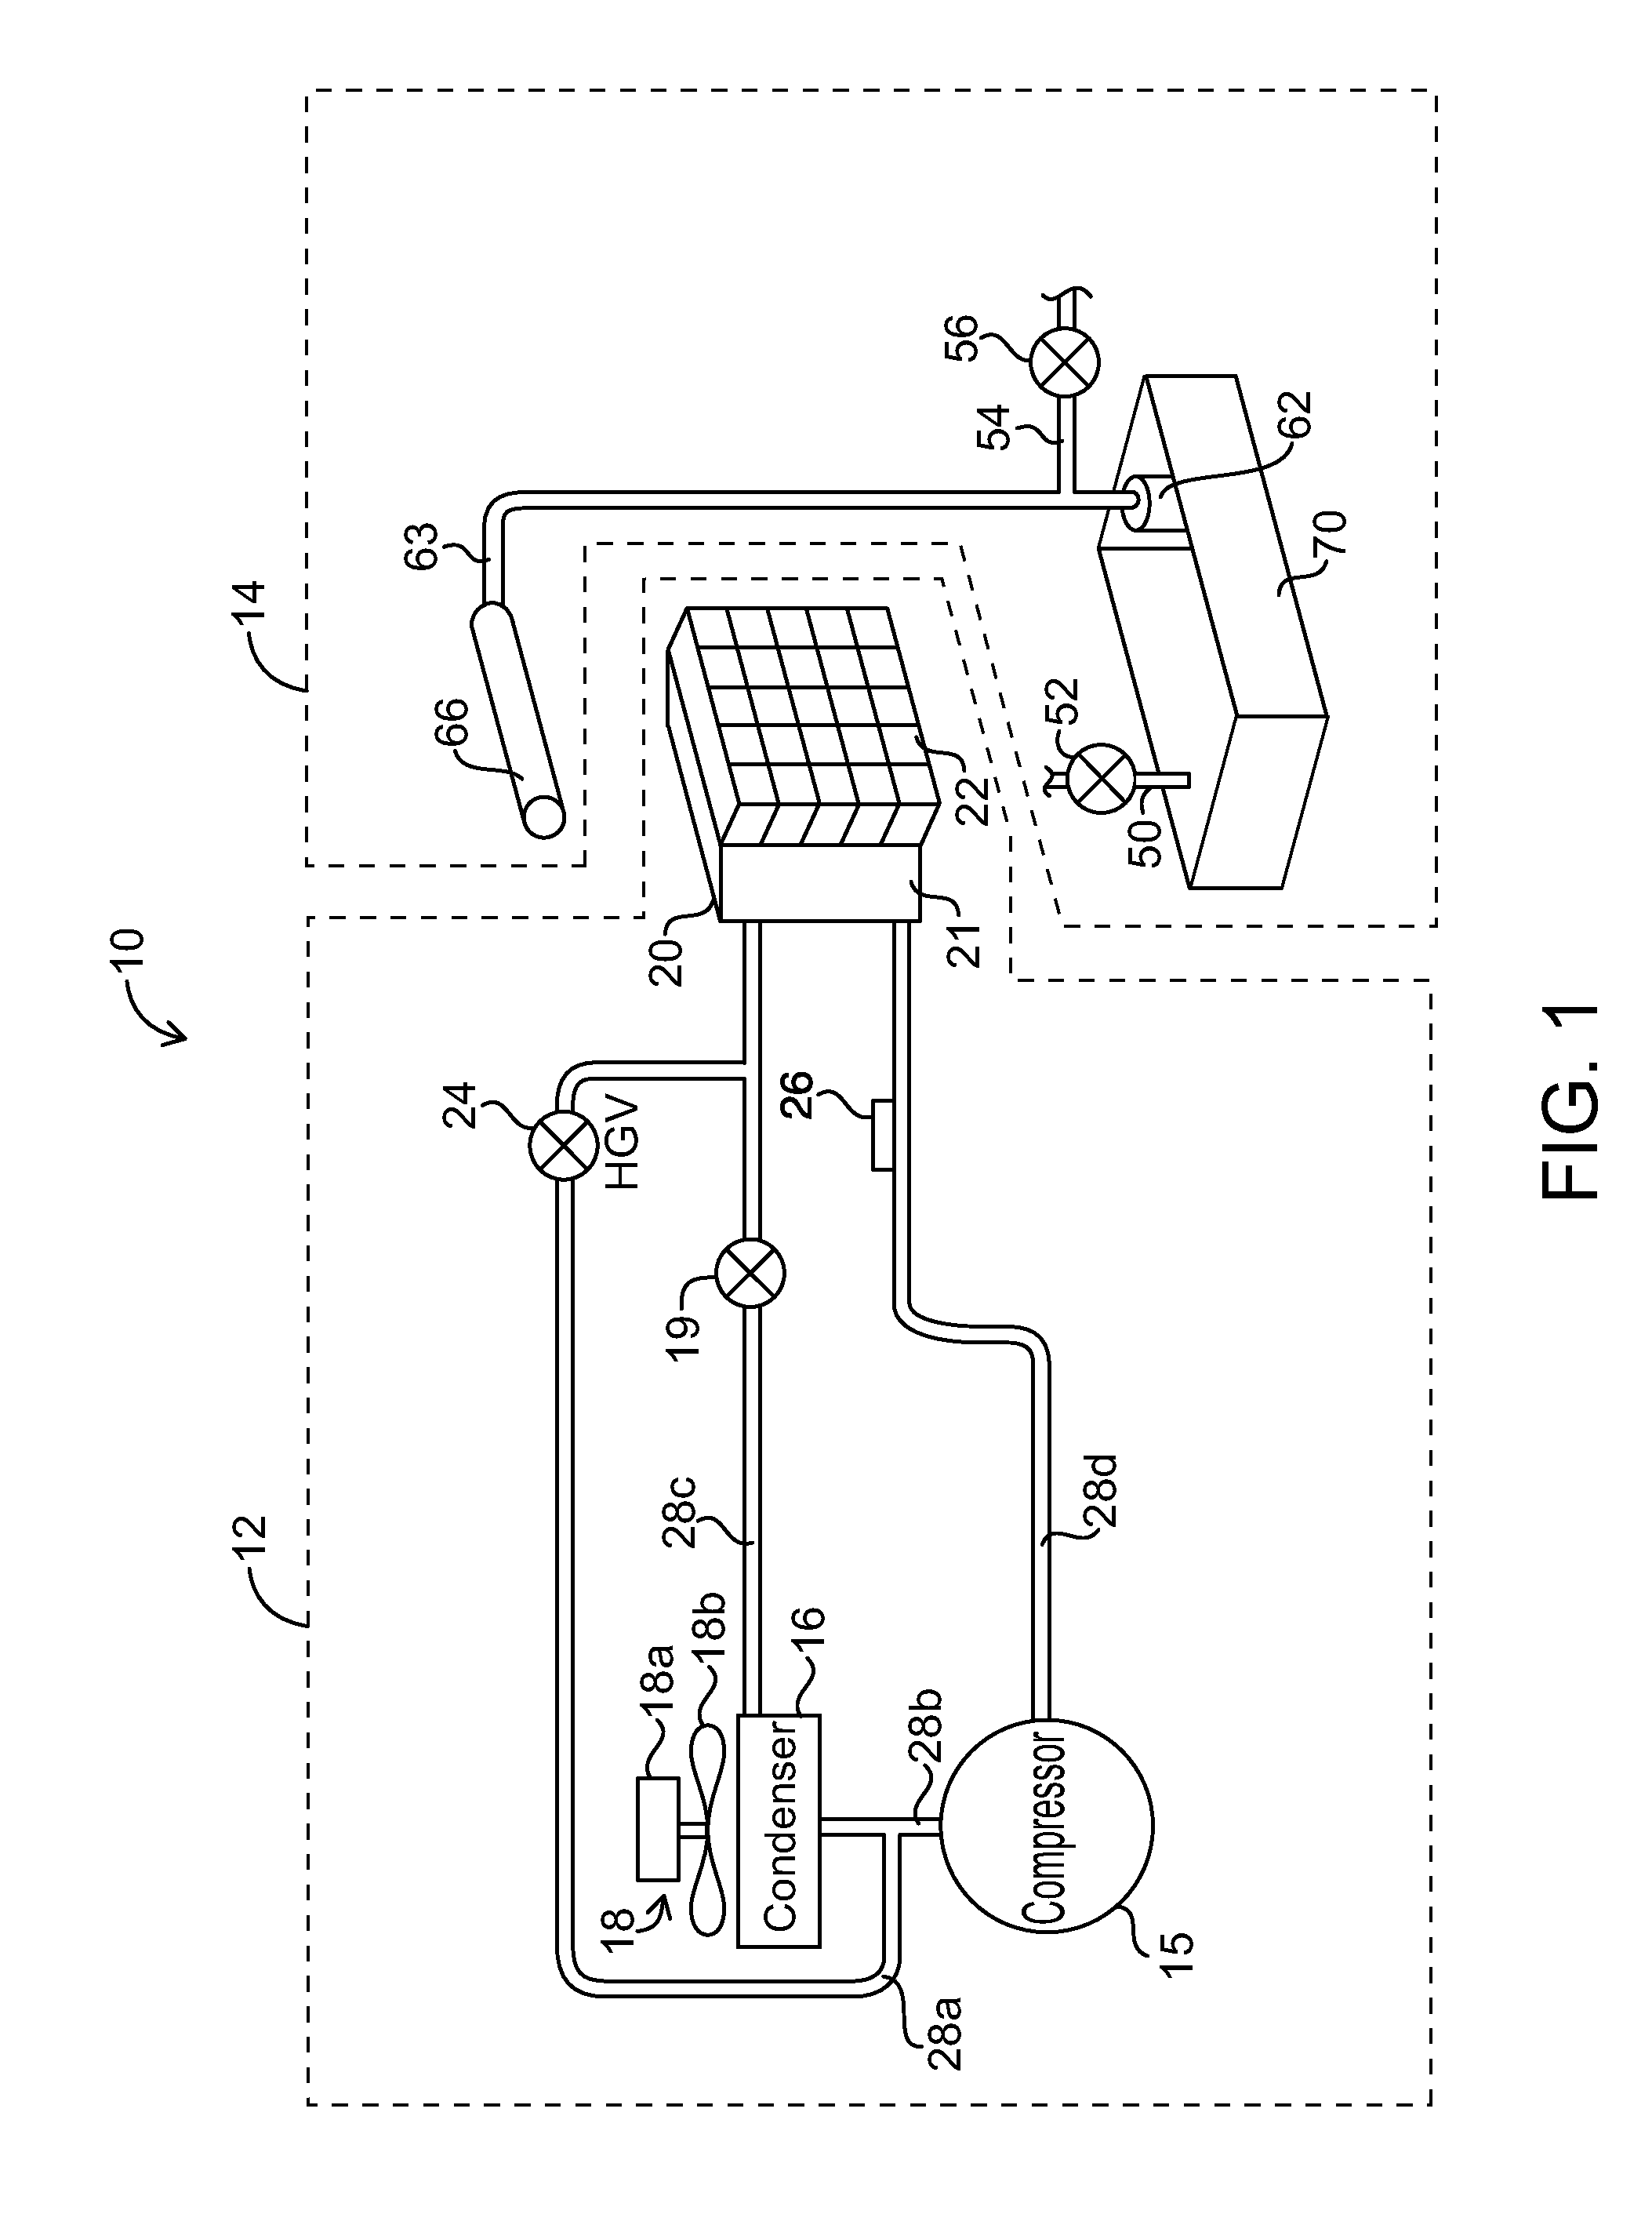 Ice maker with reversing condenser fan motor to maintain clean condenser